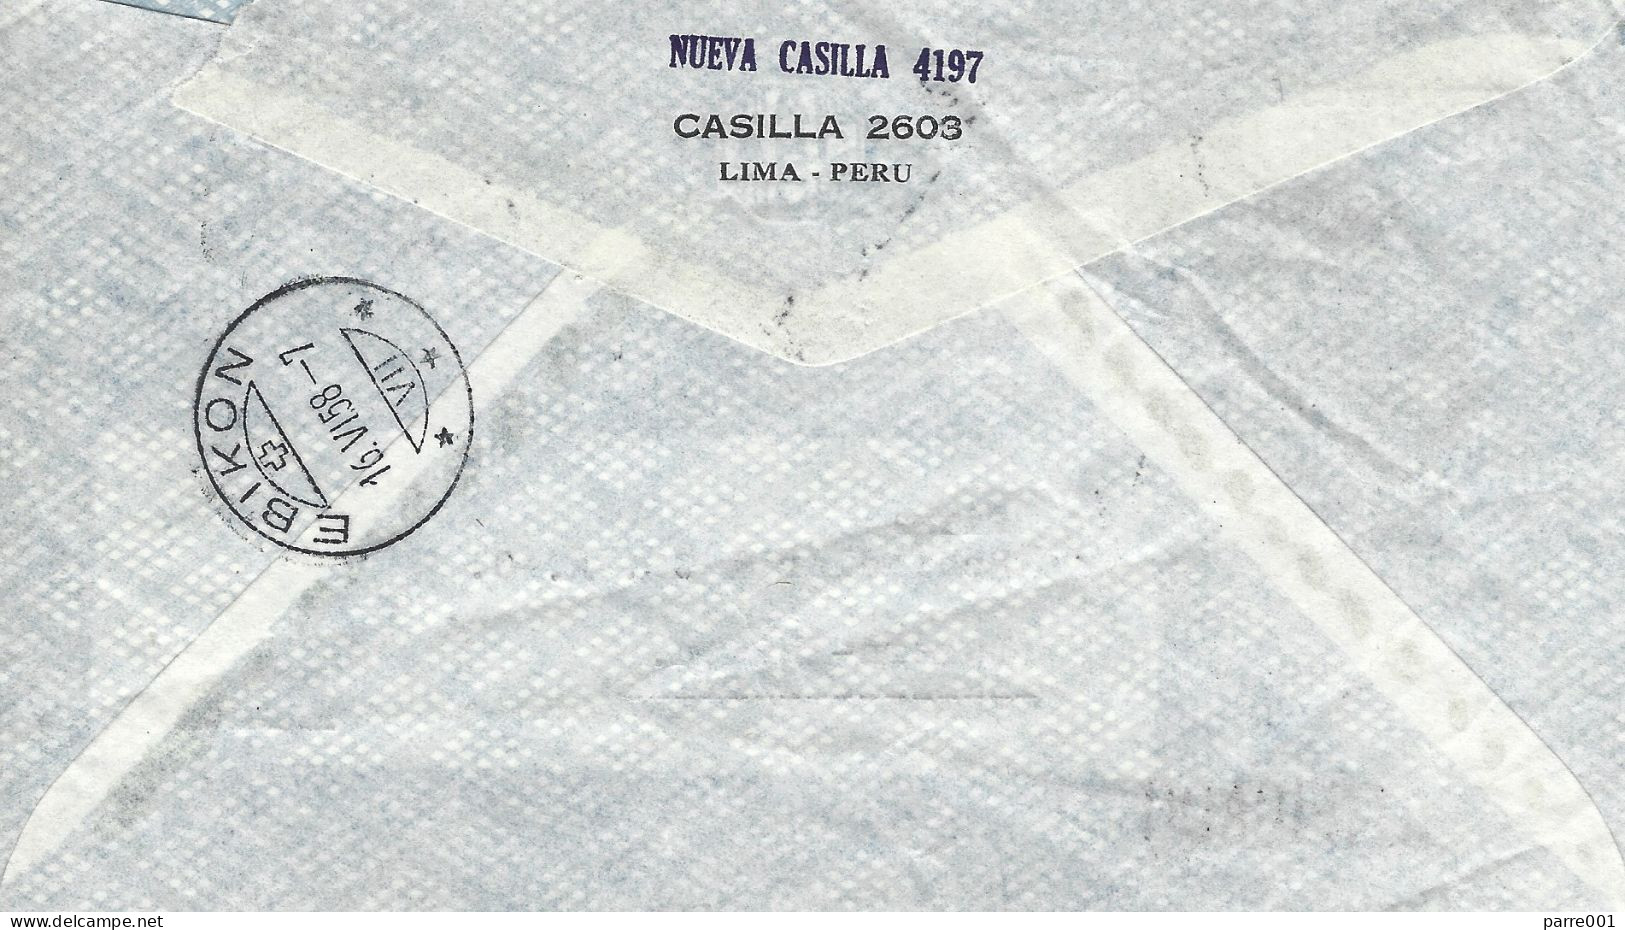 Peru 1958 Lima Cigarettes Tumbes Tobacco Growing Area Registered Cover - Tobacco